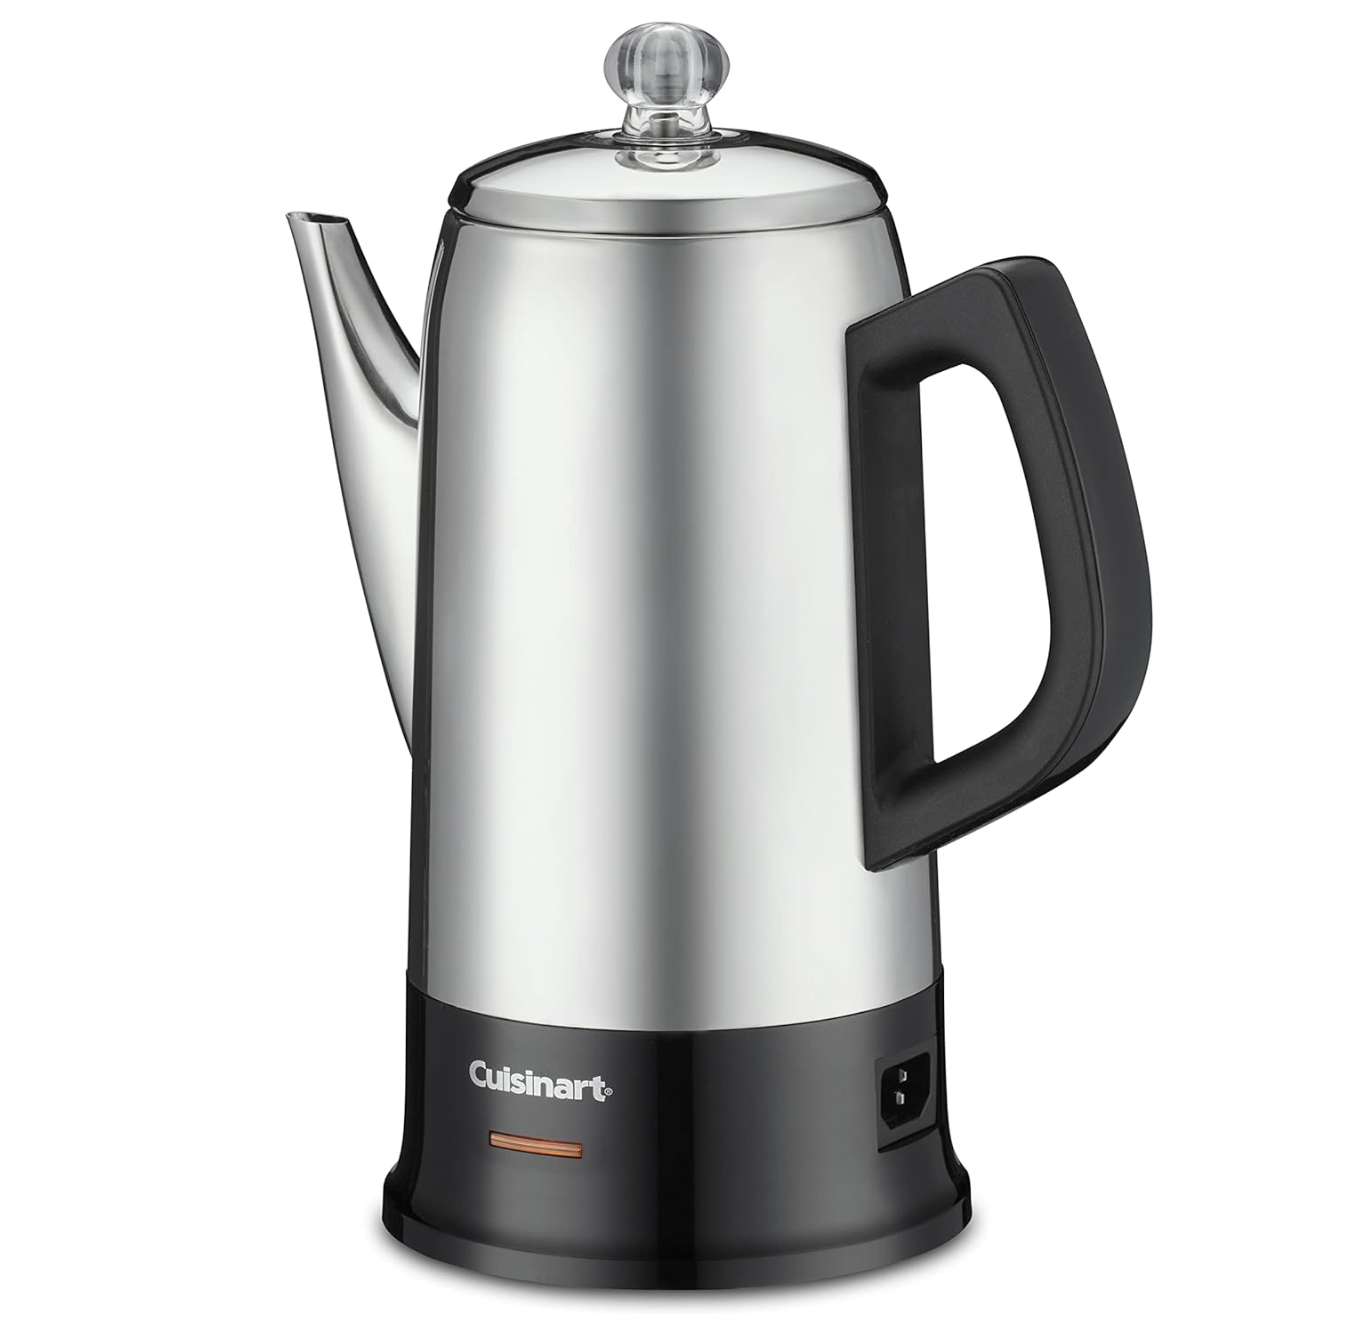 Cuisinart Classic Stainless Percolator – 12-Cup